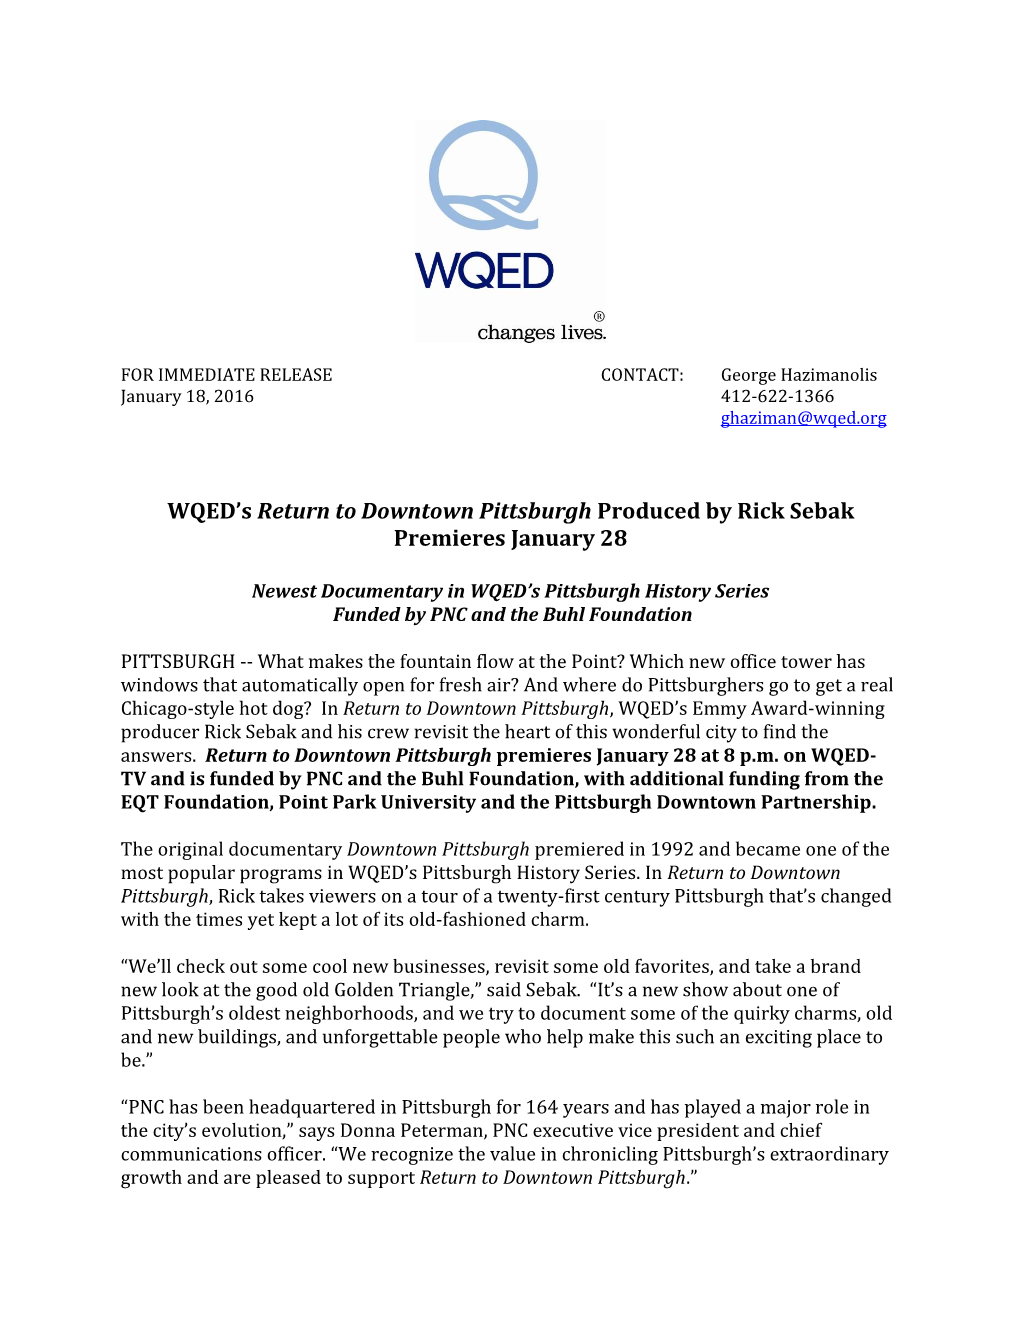 WQED's Return to Downtown Pittsburgh Produced by Rick Sebak